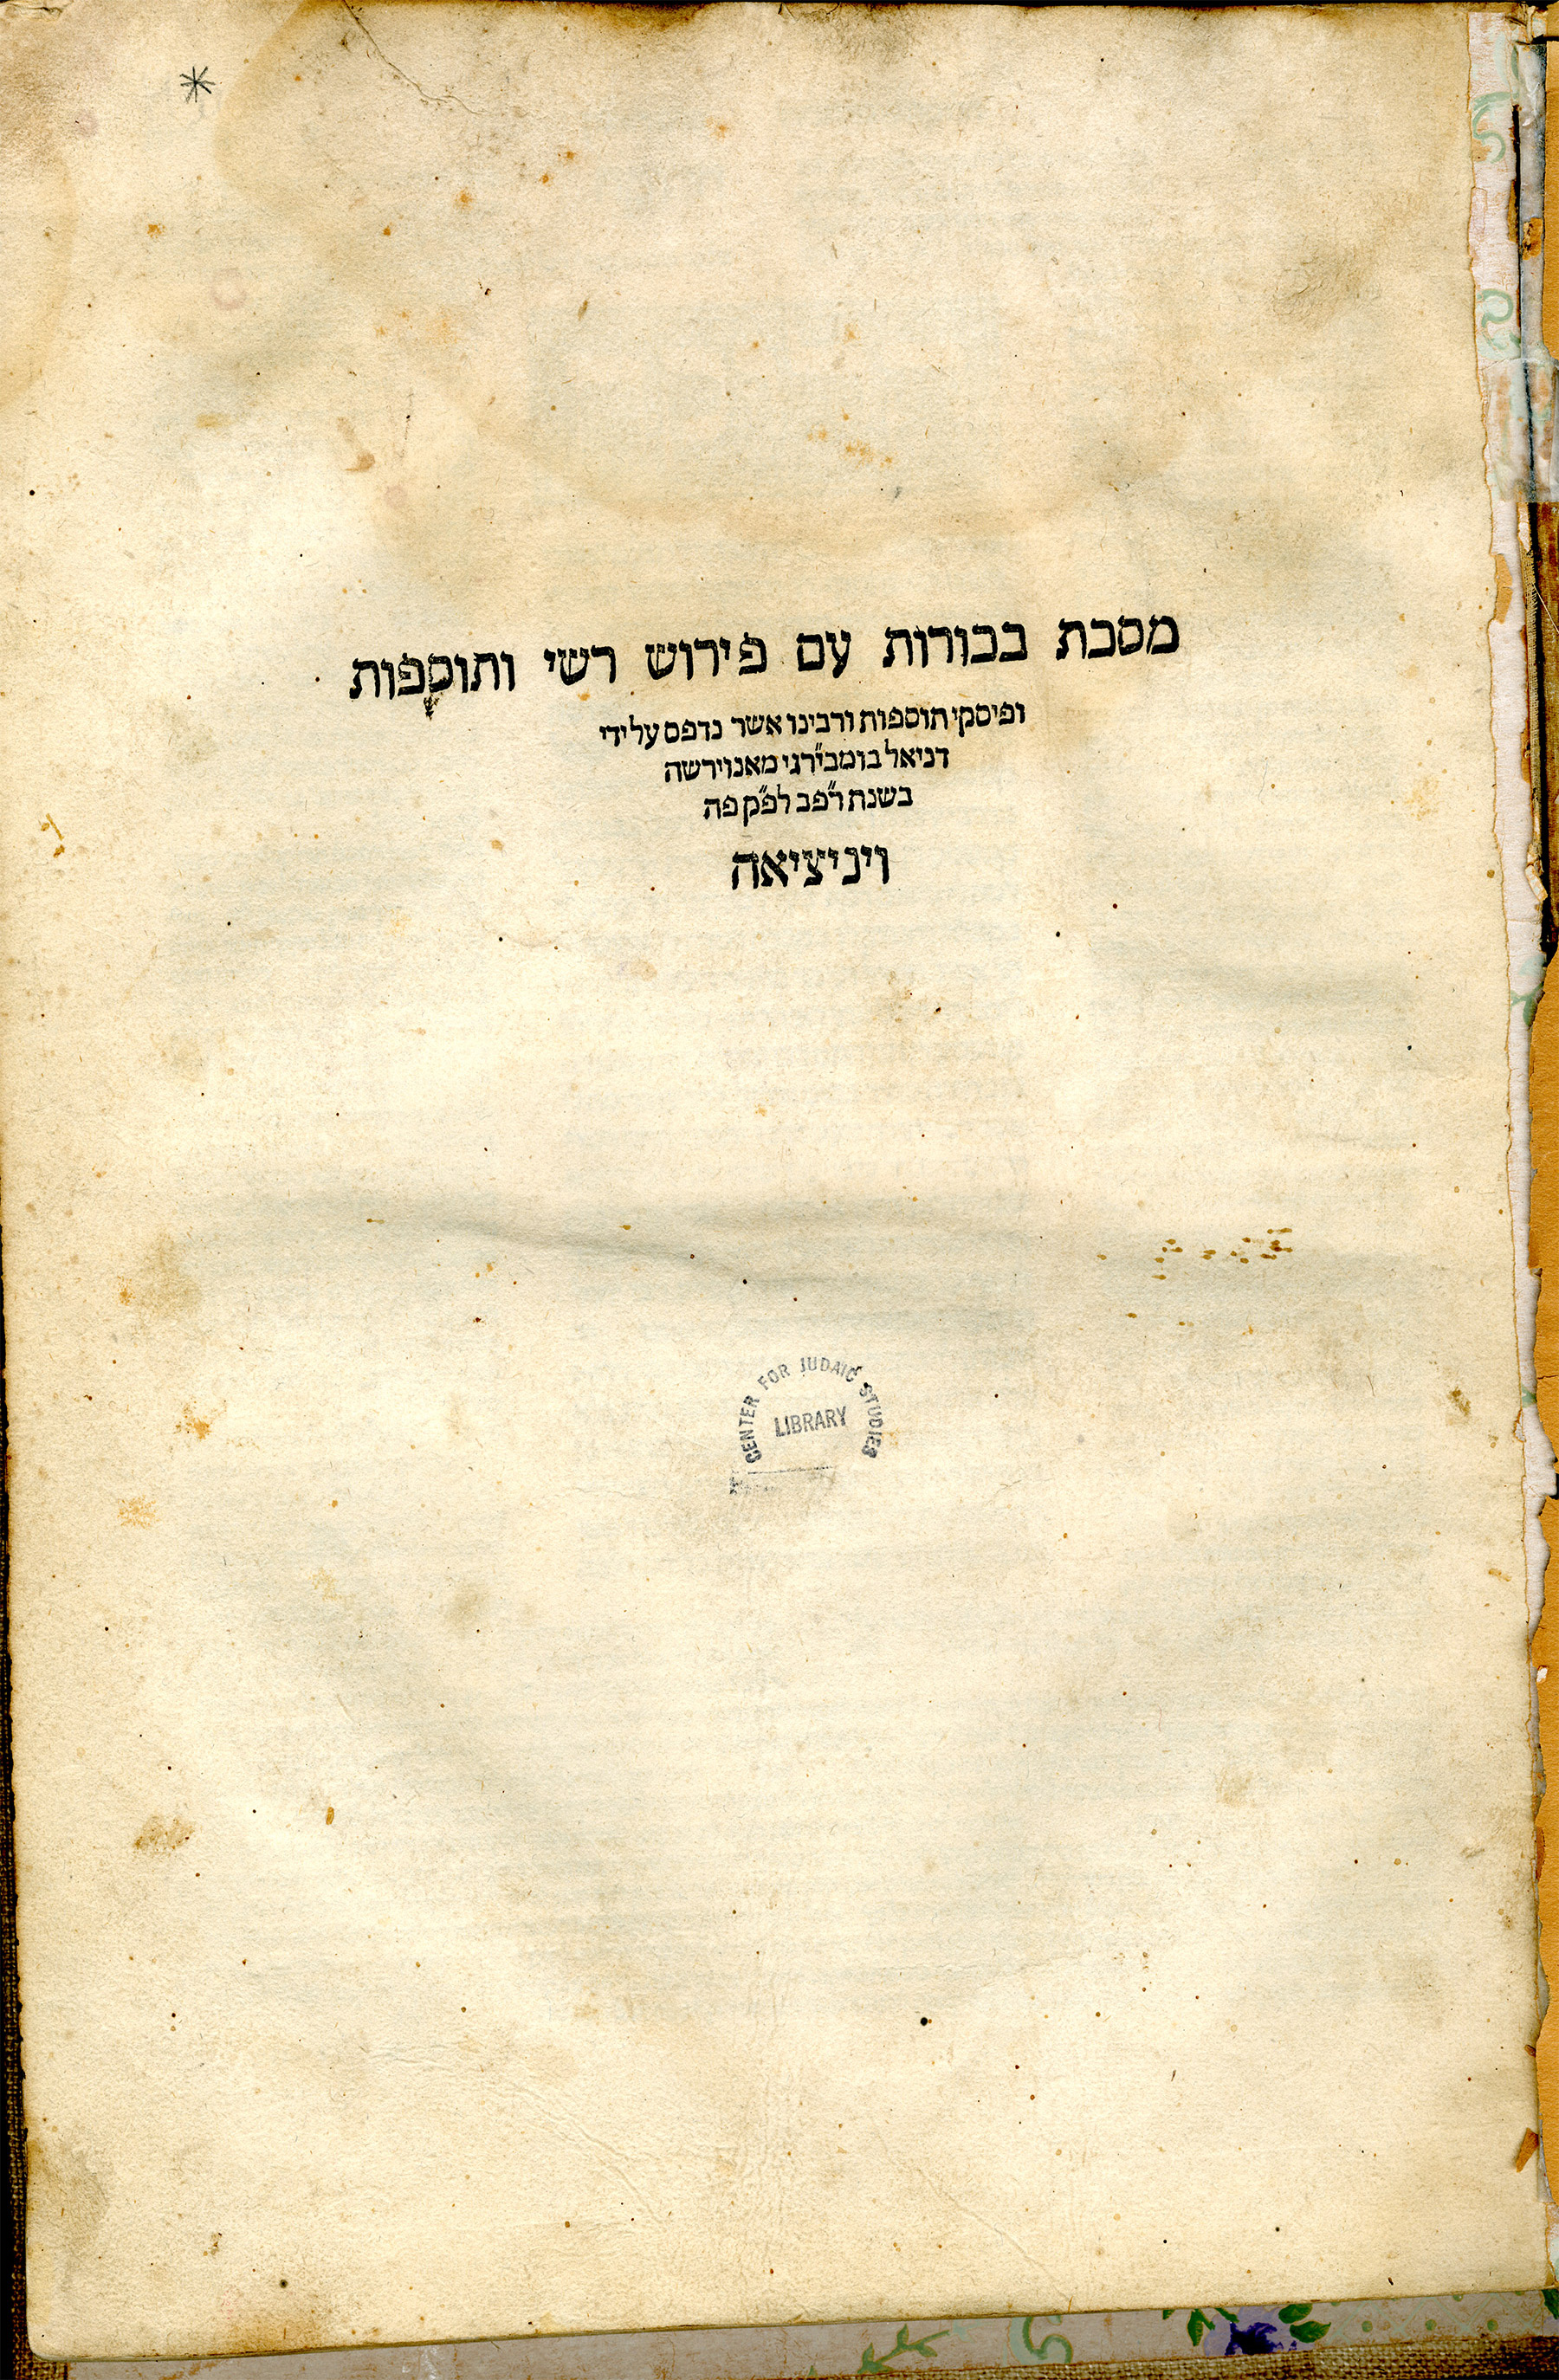 Title page of the Venice Talmud